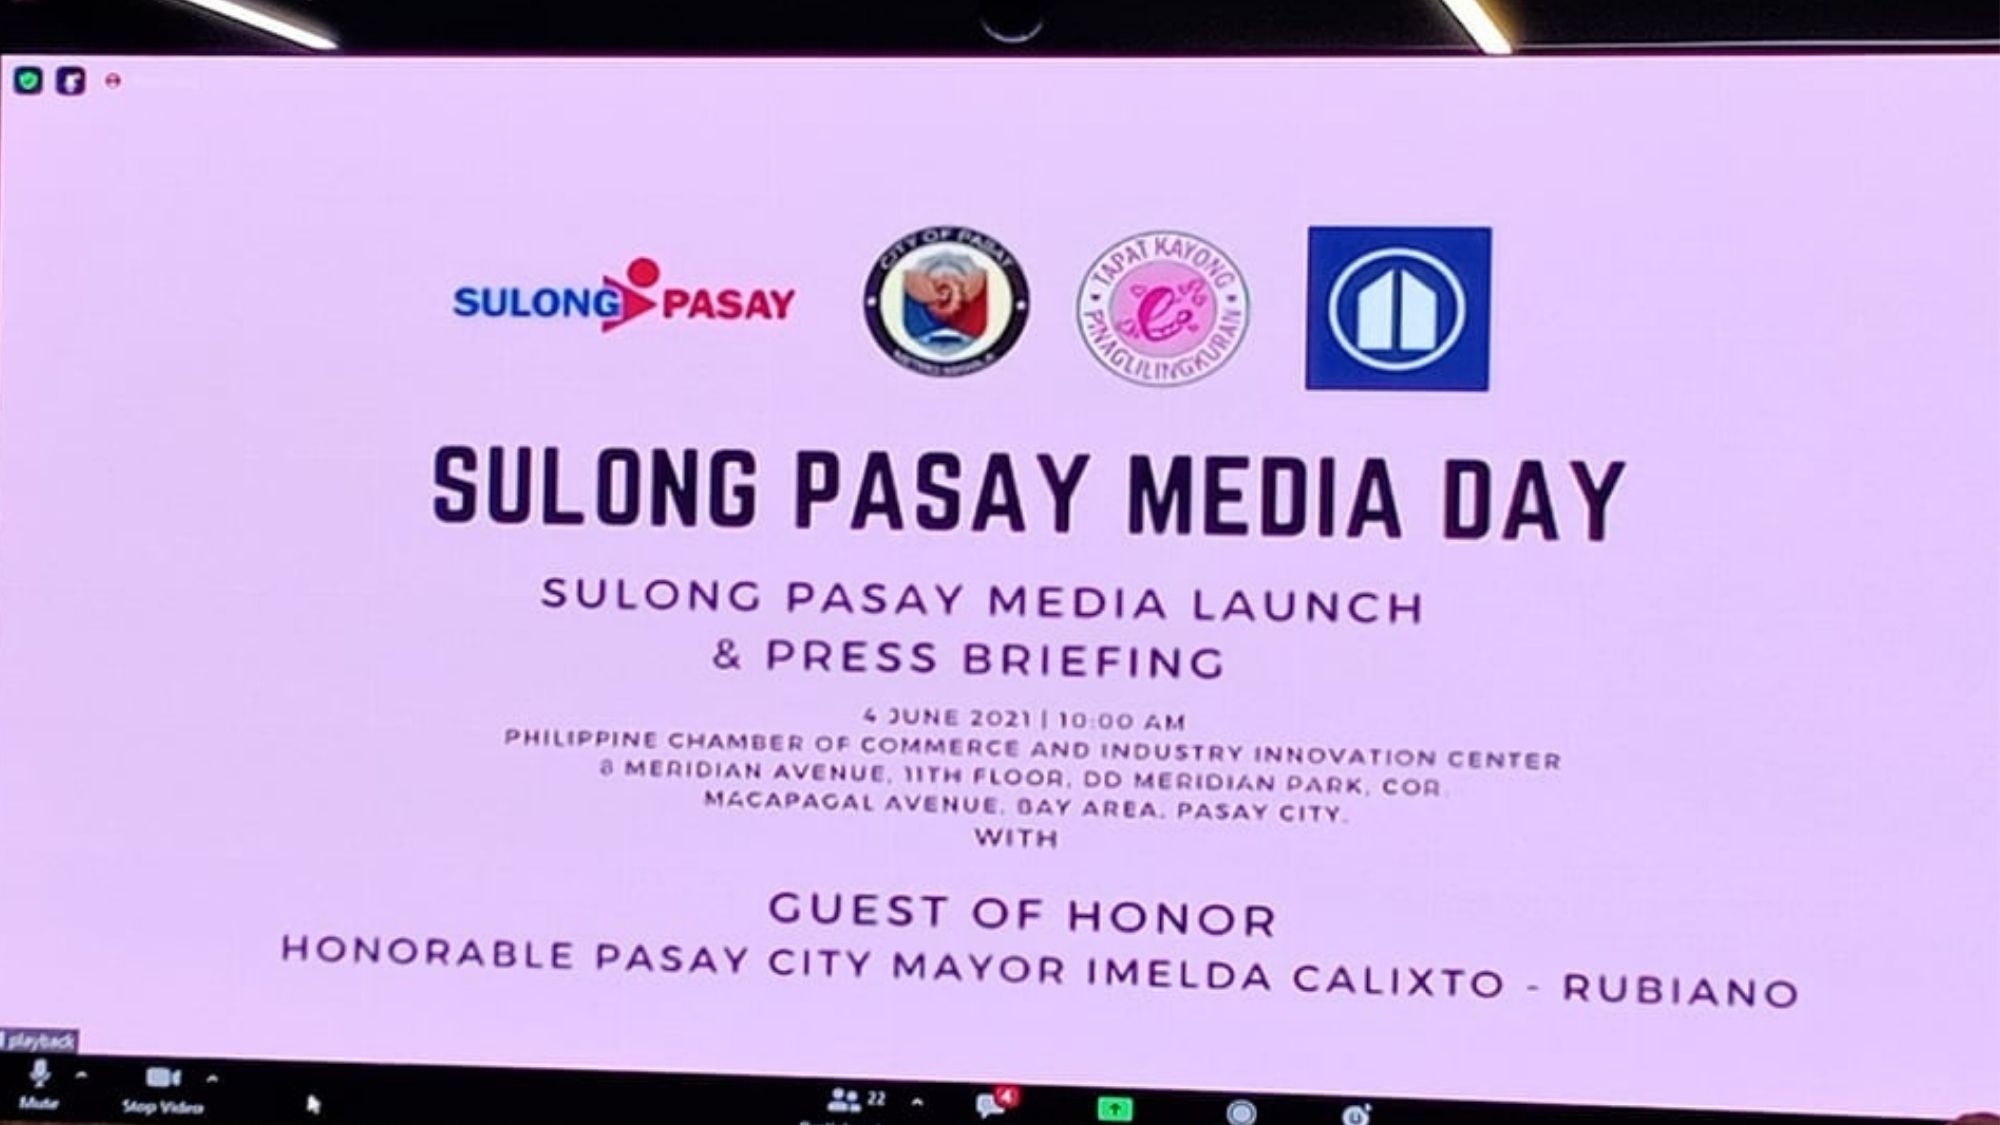 SULONG PASAY LAUNCHED